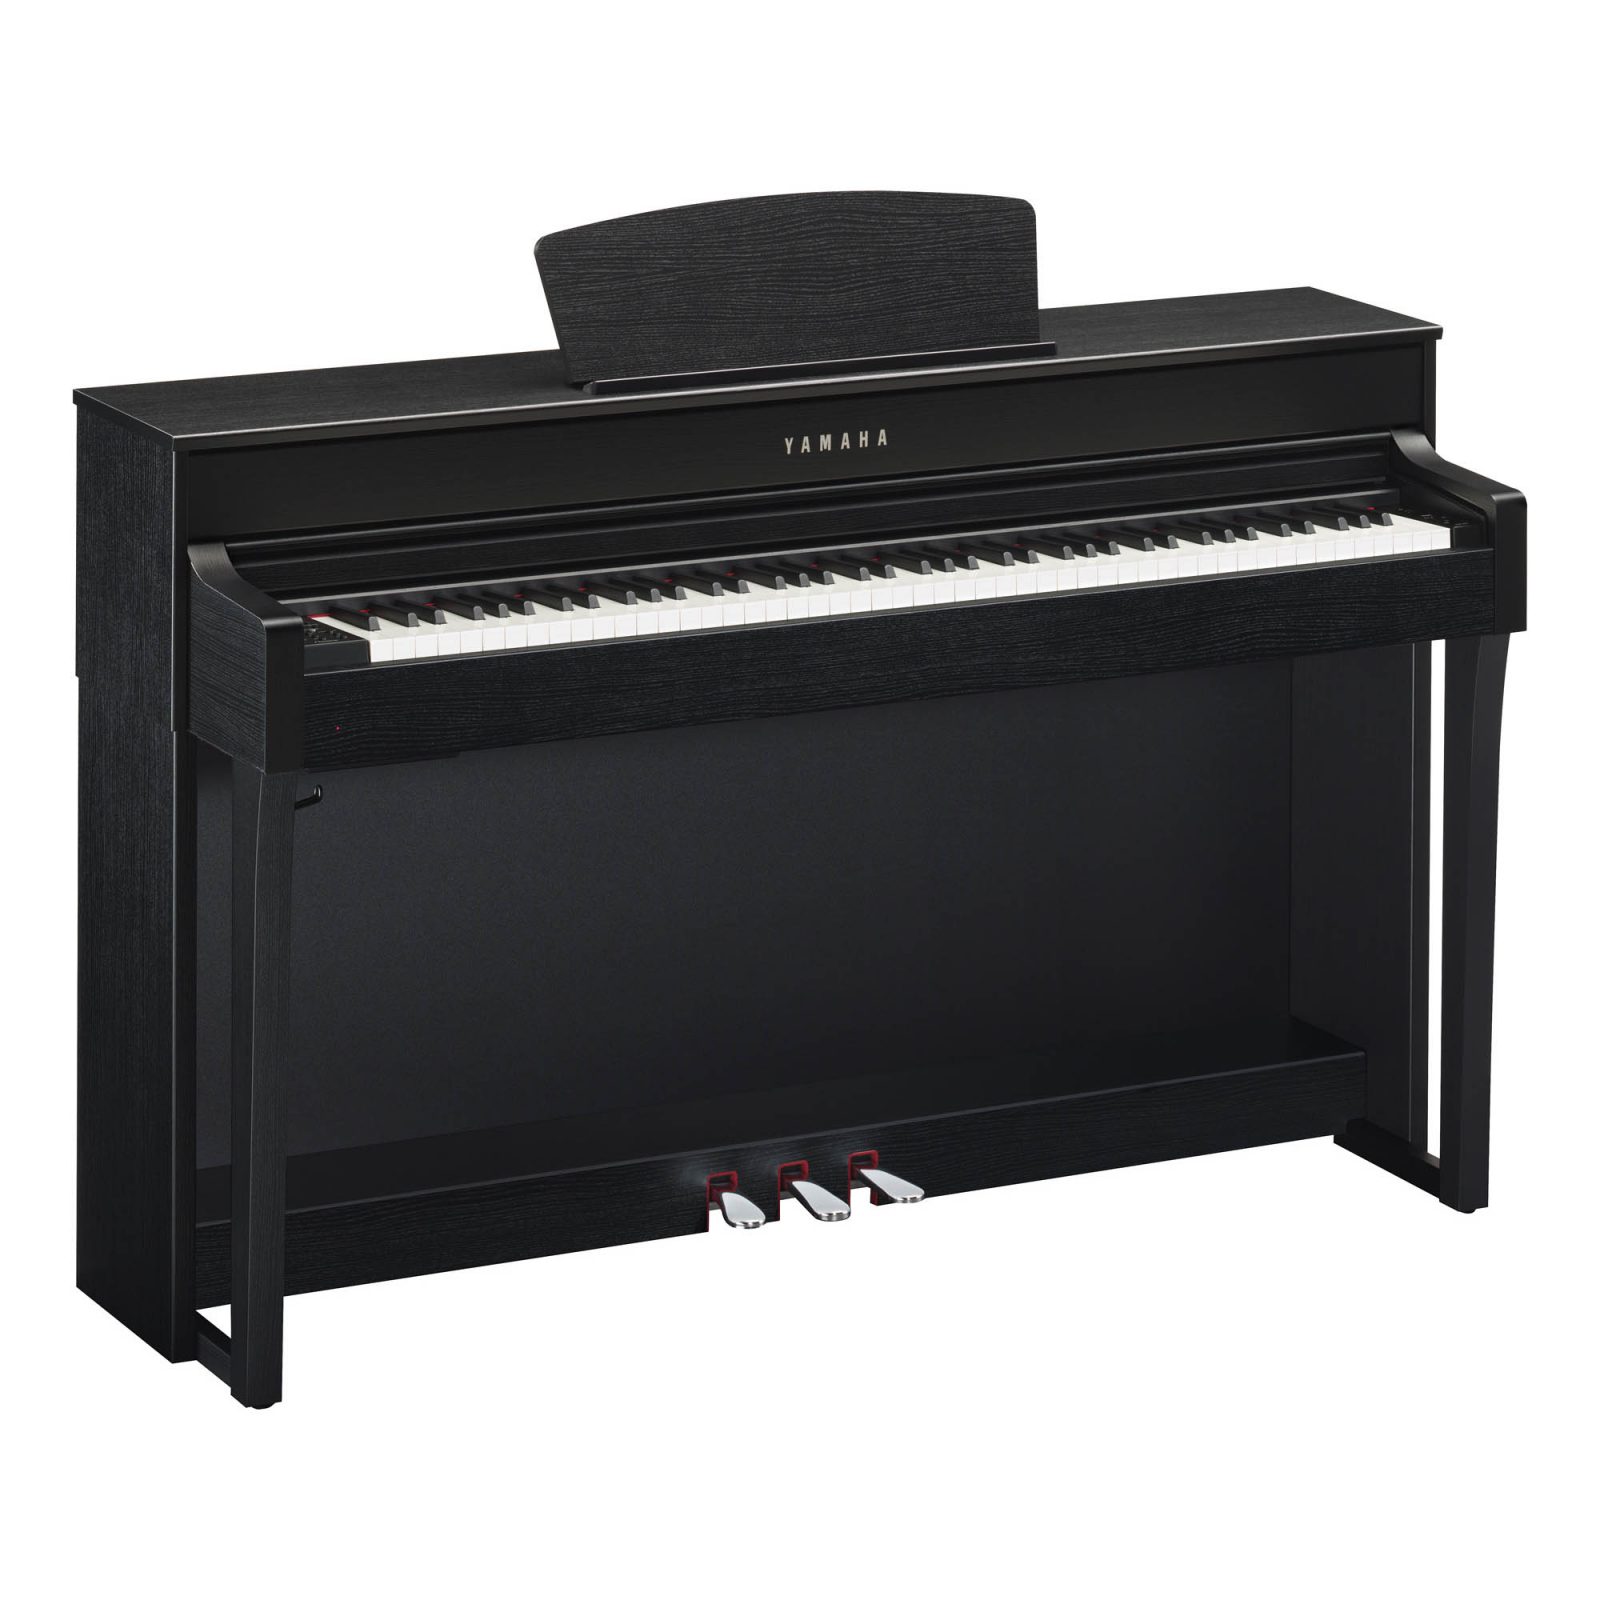 Yamaha CLP-635 Digital Piano in various finishes